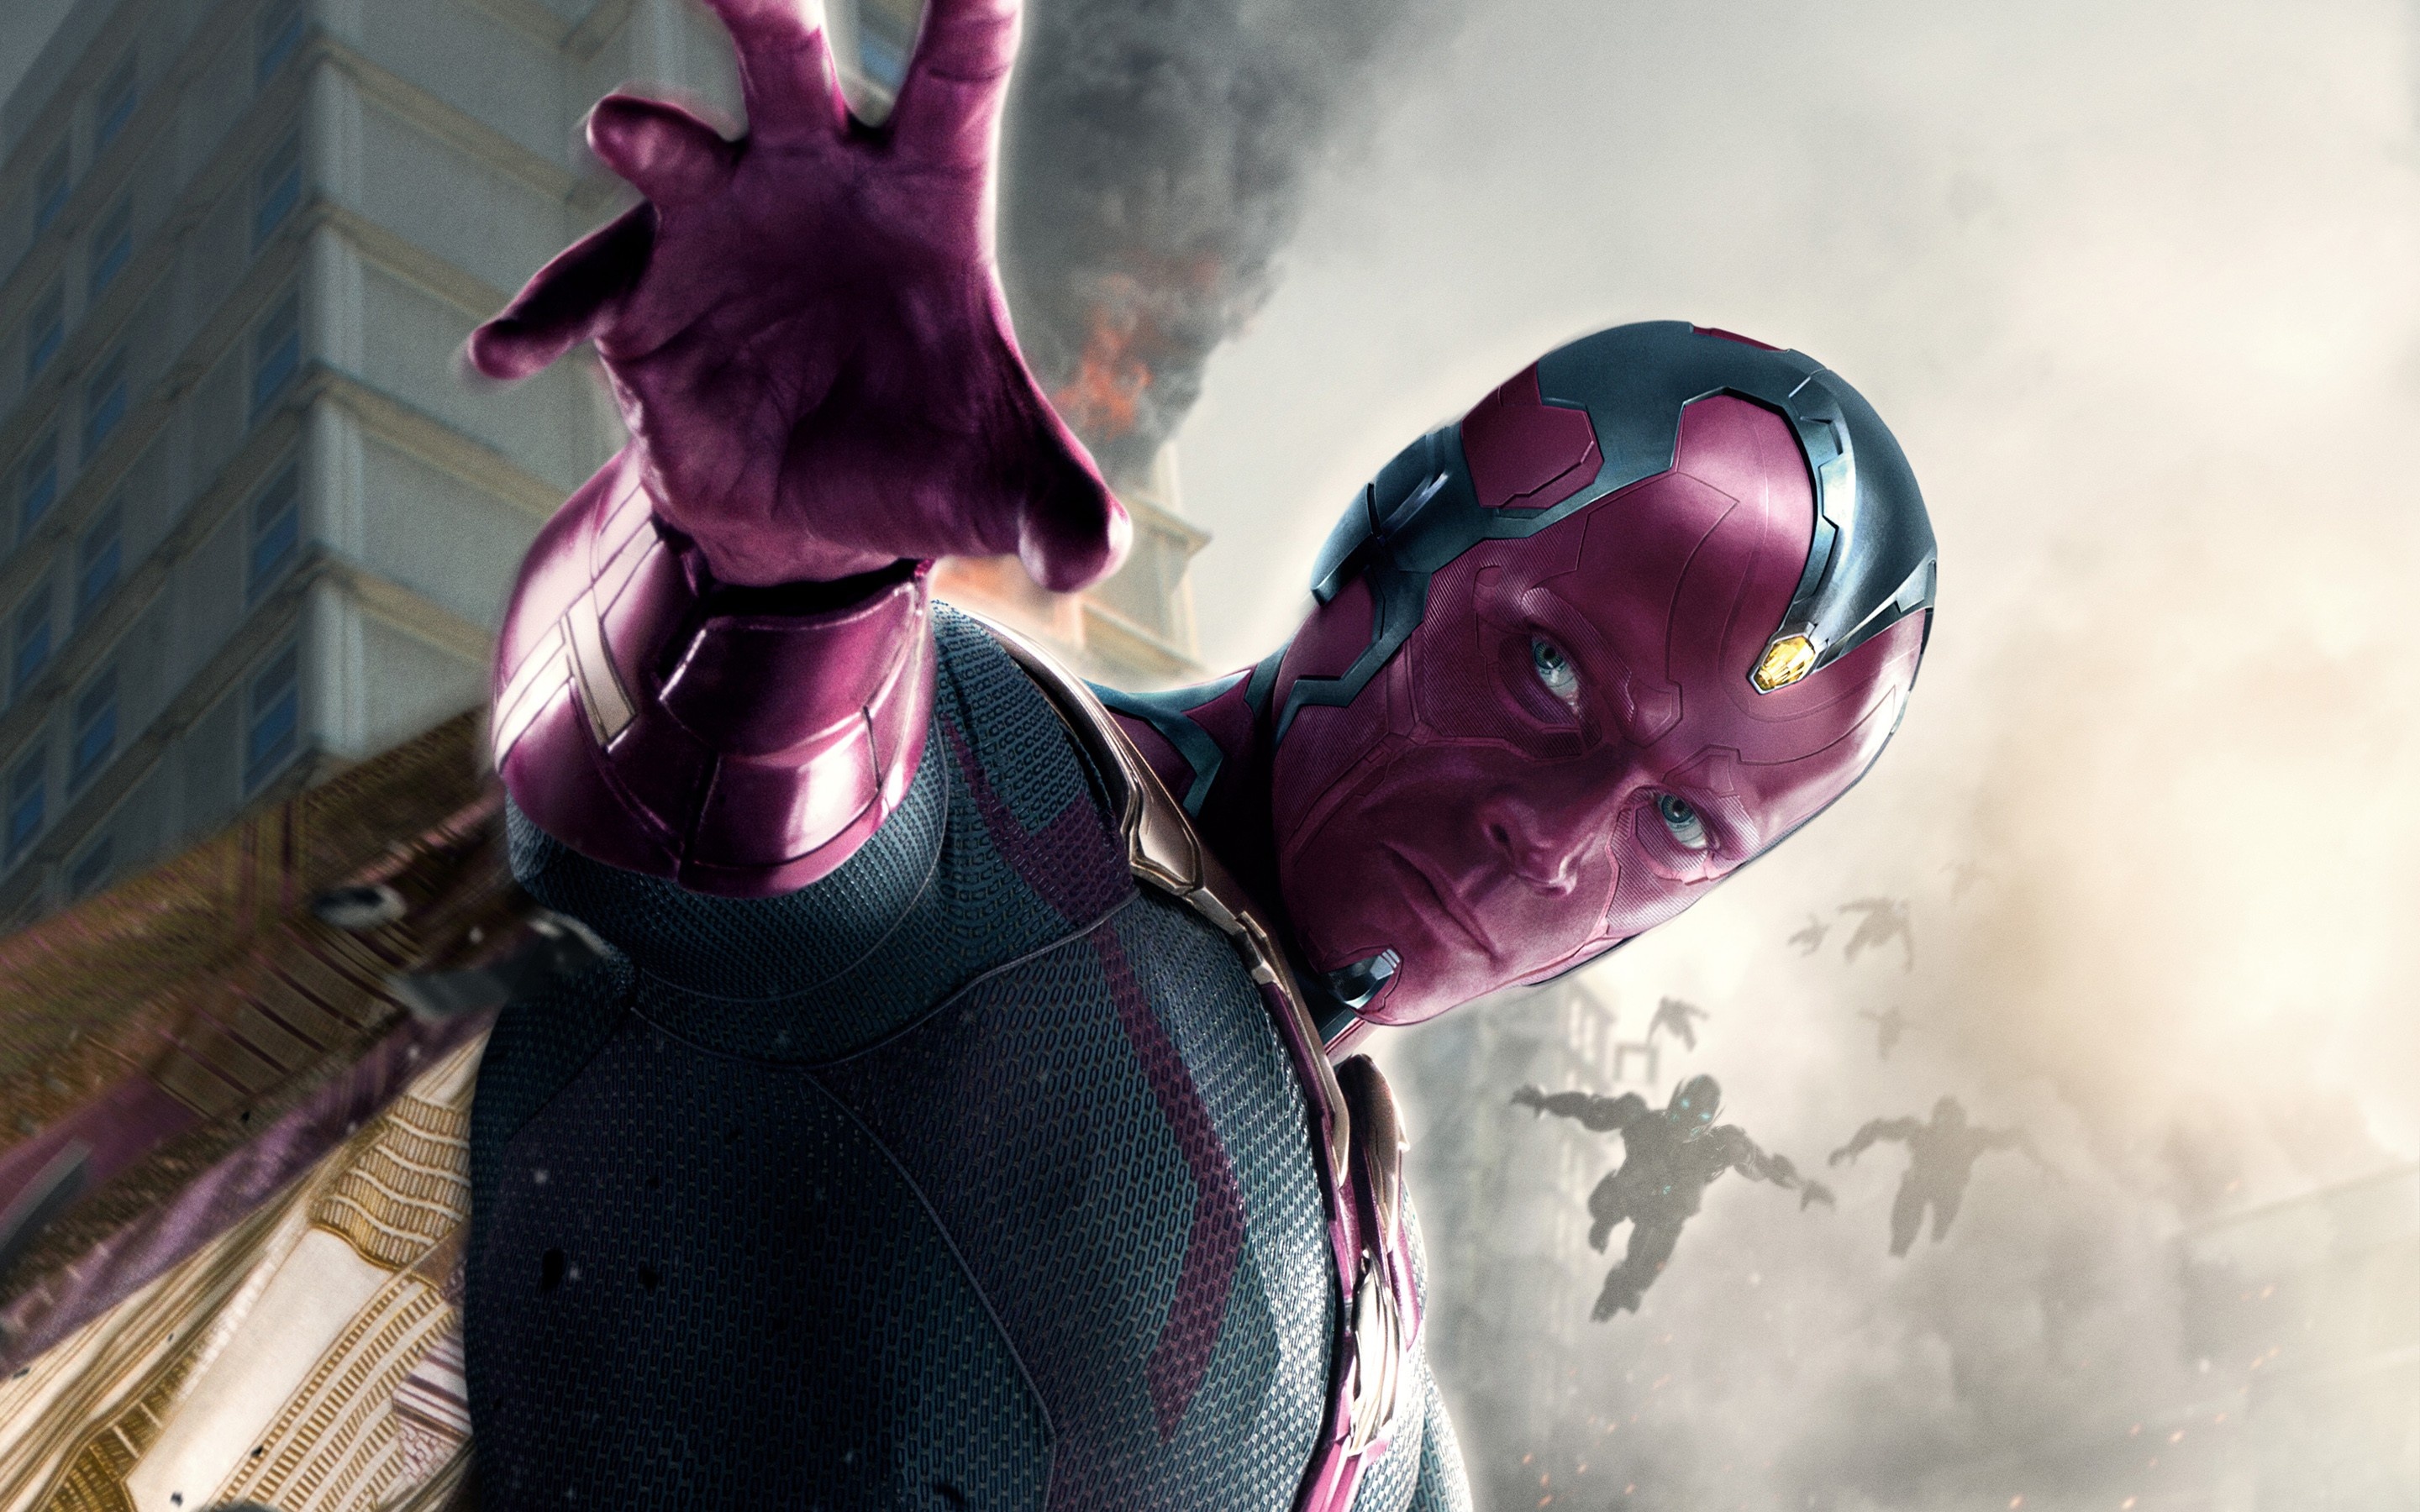 Avengers: Age of Ultron, Vision, High-definition wallpapers, Vibrant colors, 2880x1800 HD Desktop